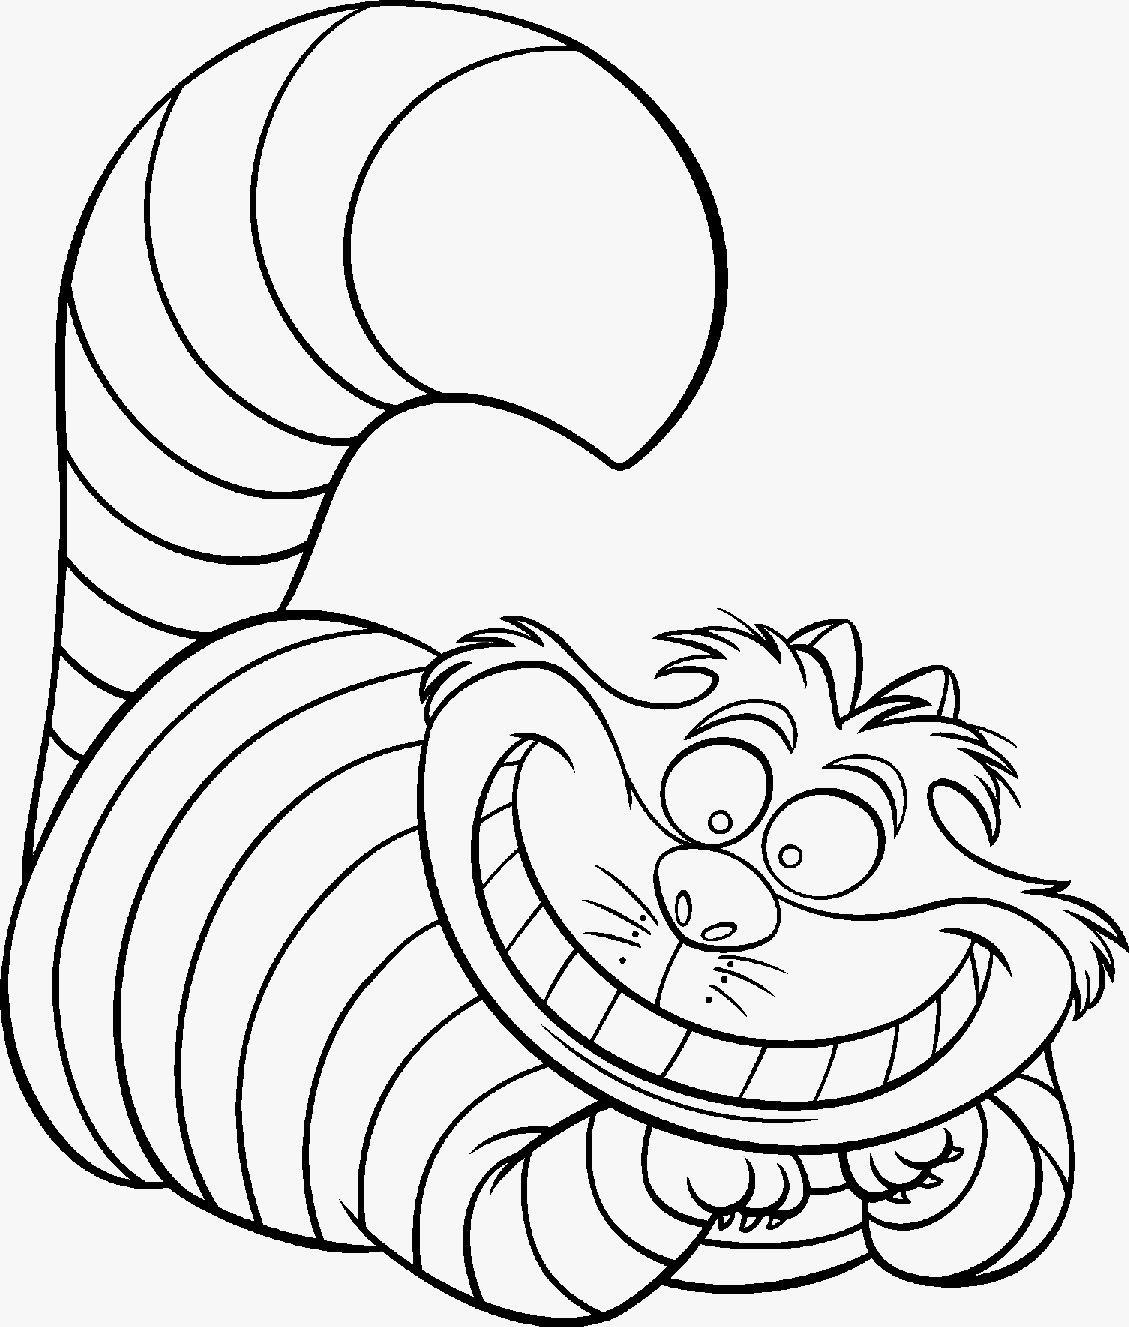 free-coloring-pages-com-printable-printable-free-templates-download